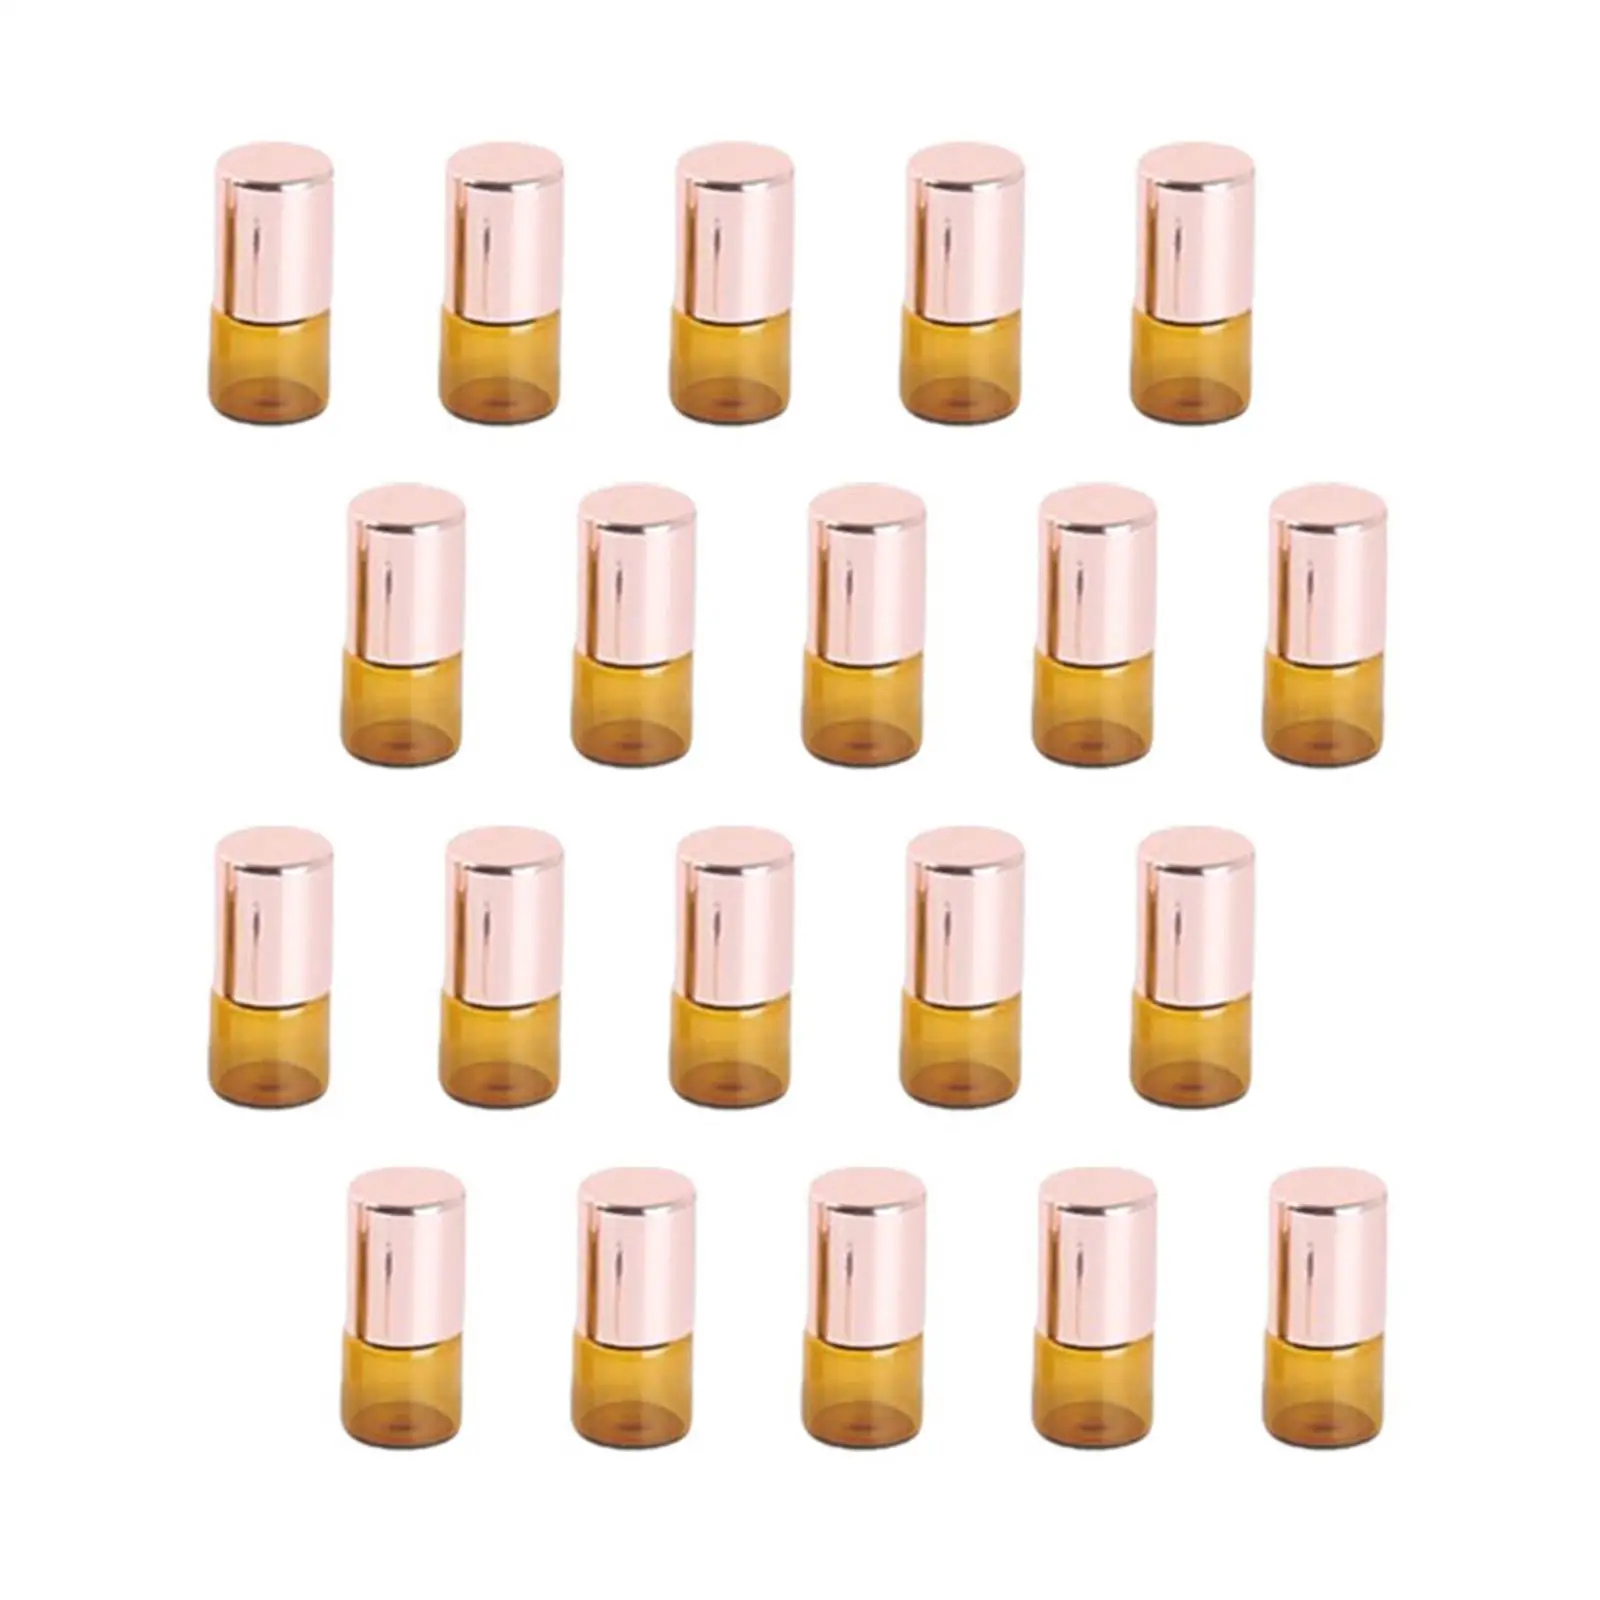 20 Pieces Empty Amber Glass Roller Ball Bottles Holder for Travel and Packing Smooth Rolling Metal Ball Portable Accessory